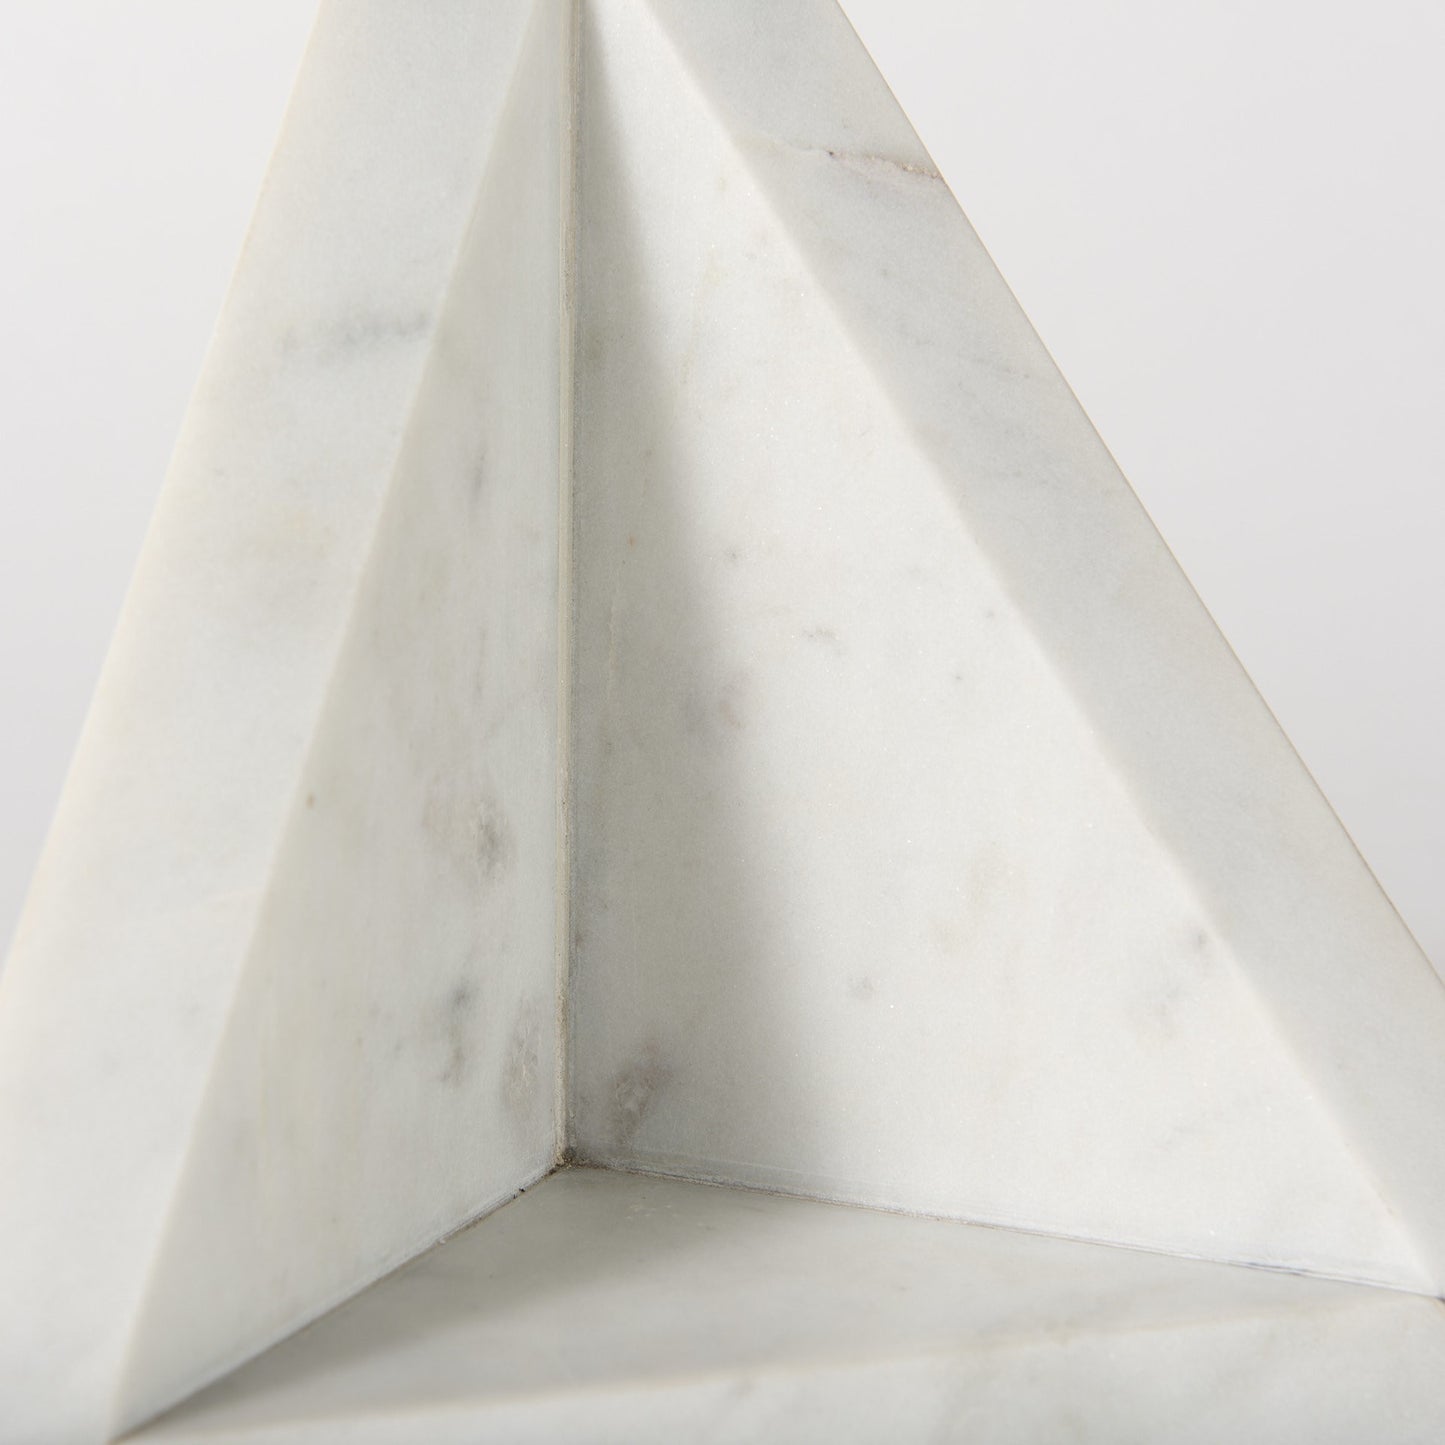 3D Modern Triangle Marble Bookends